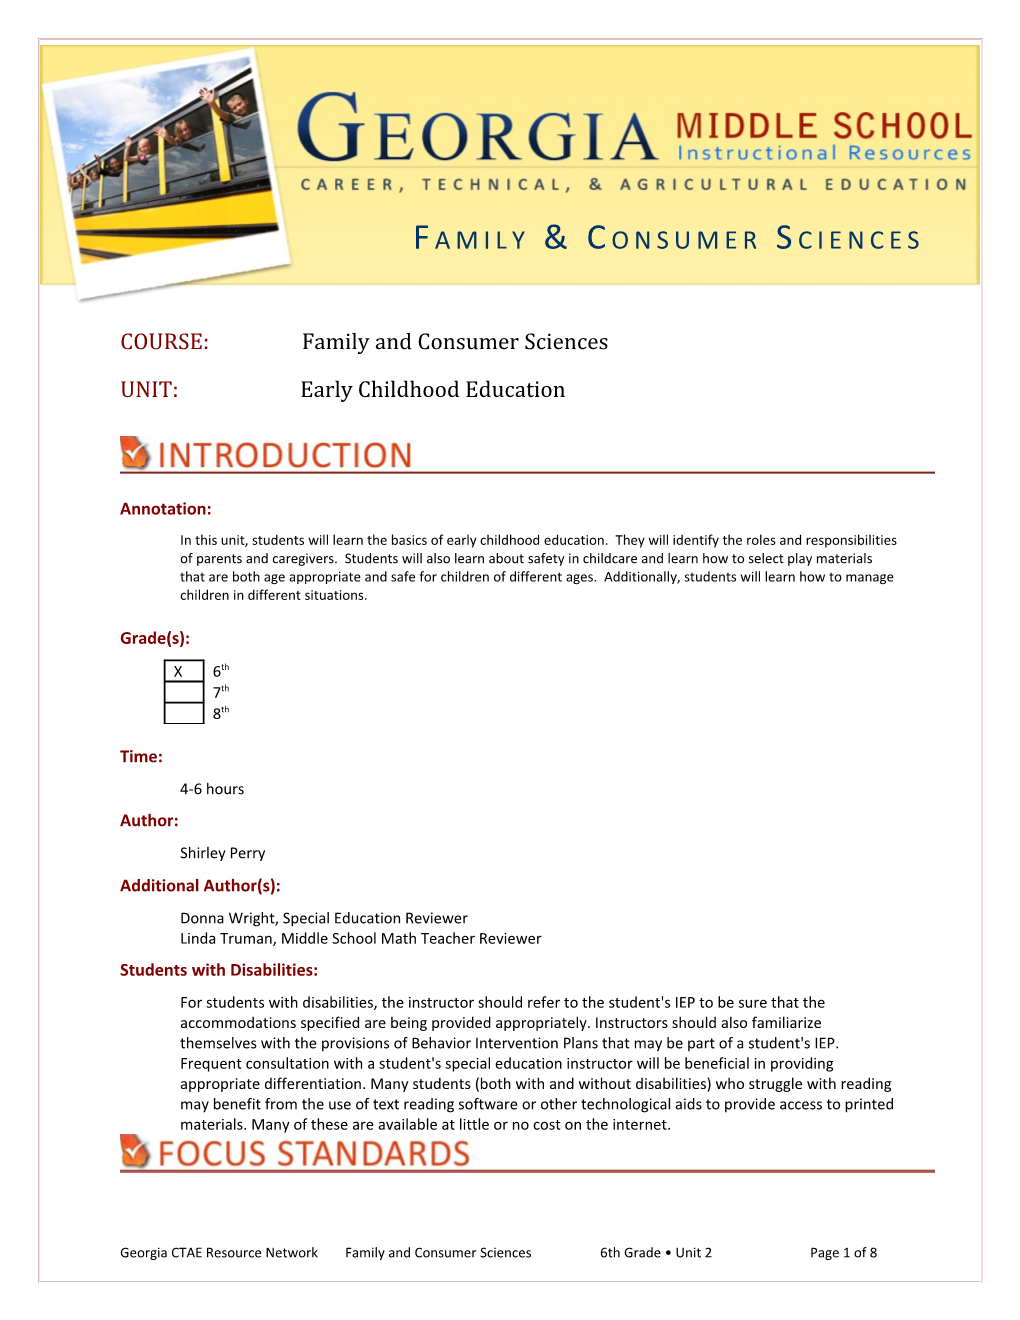 COURSE: Family and Consumer Sciences